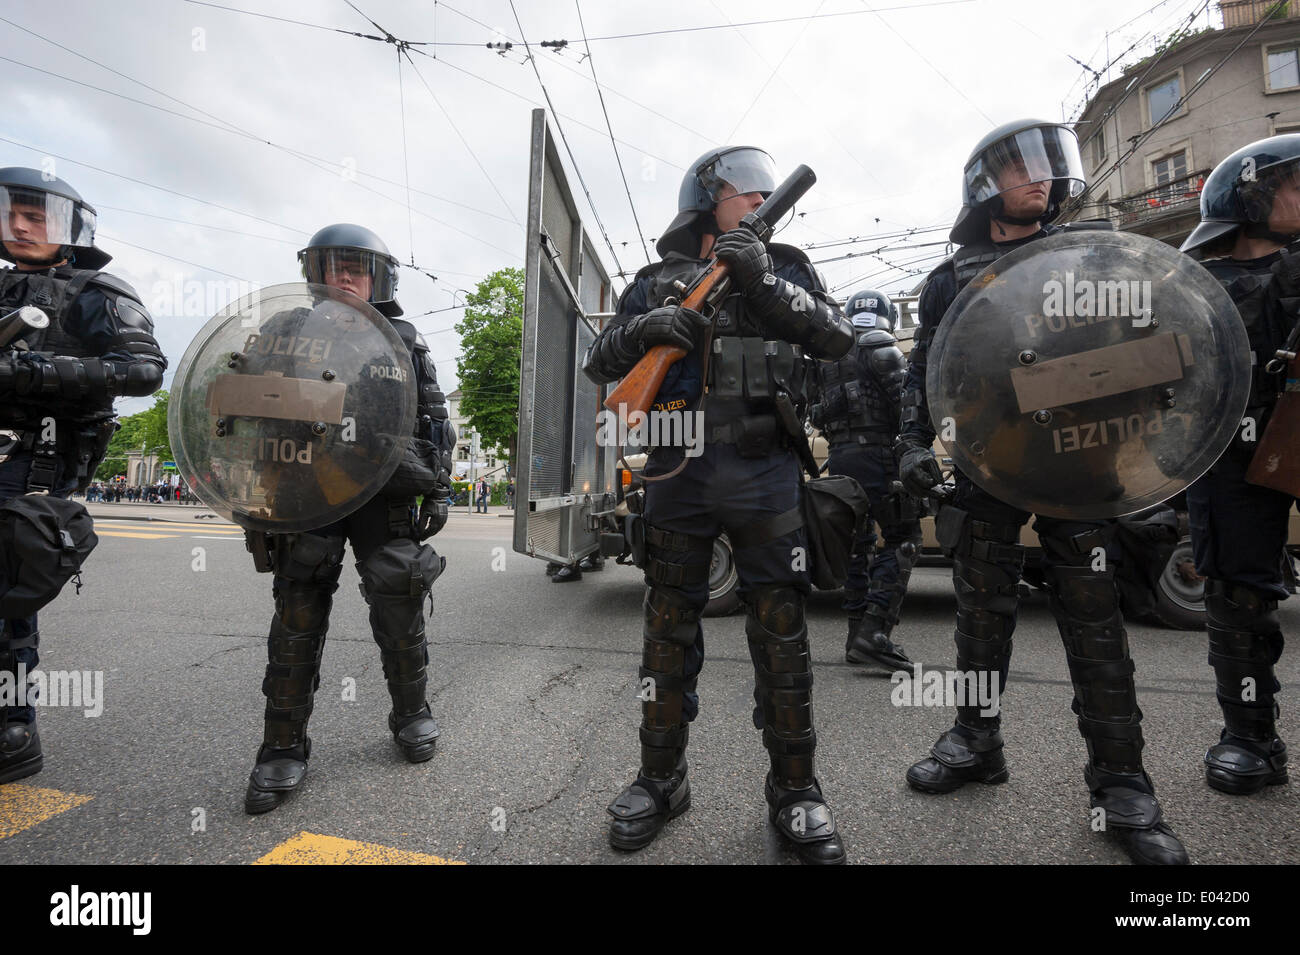 Zurich, Switzerland. 1st May, 2014. Armed police forces prepare to ...